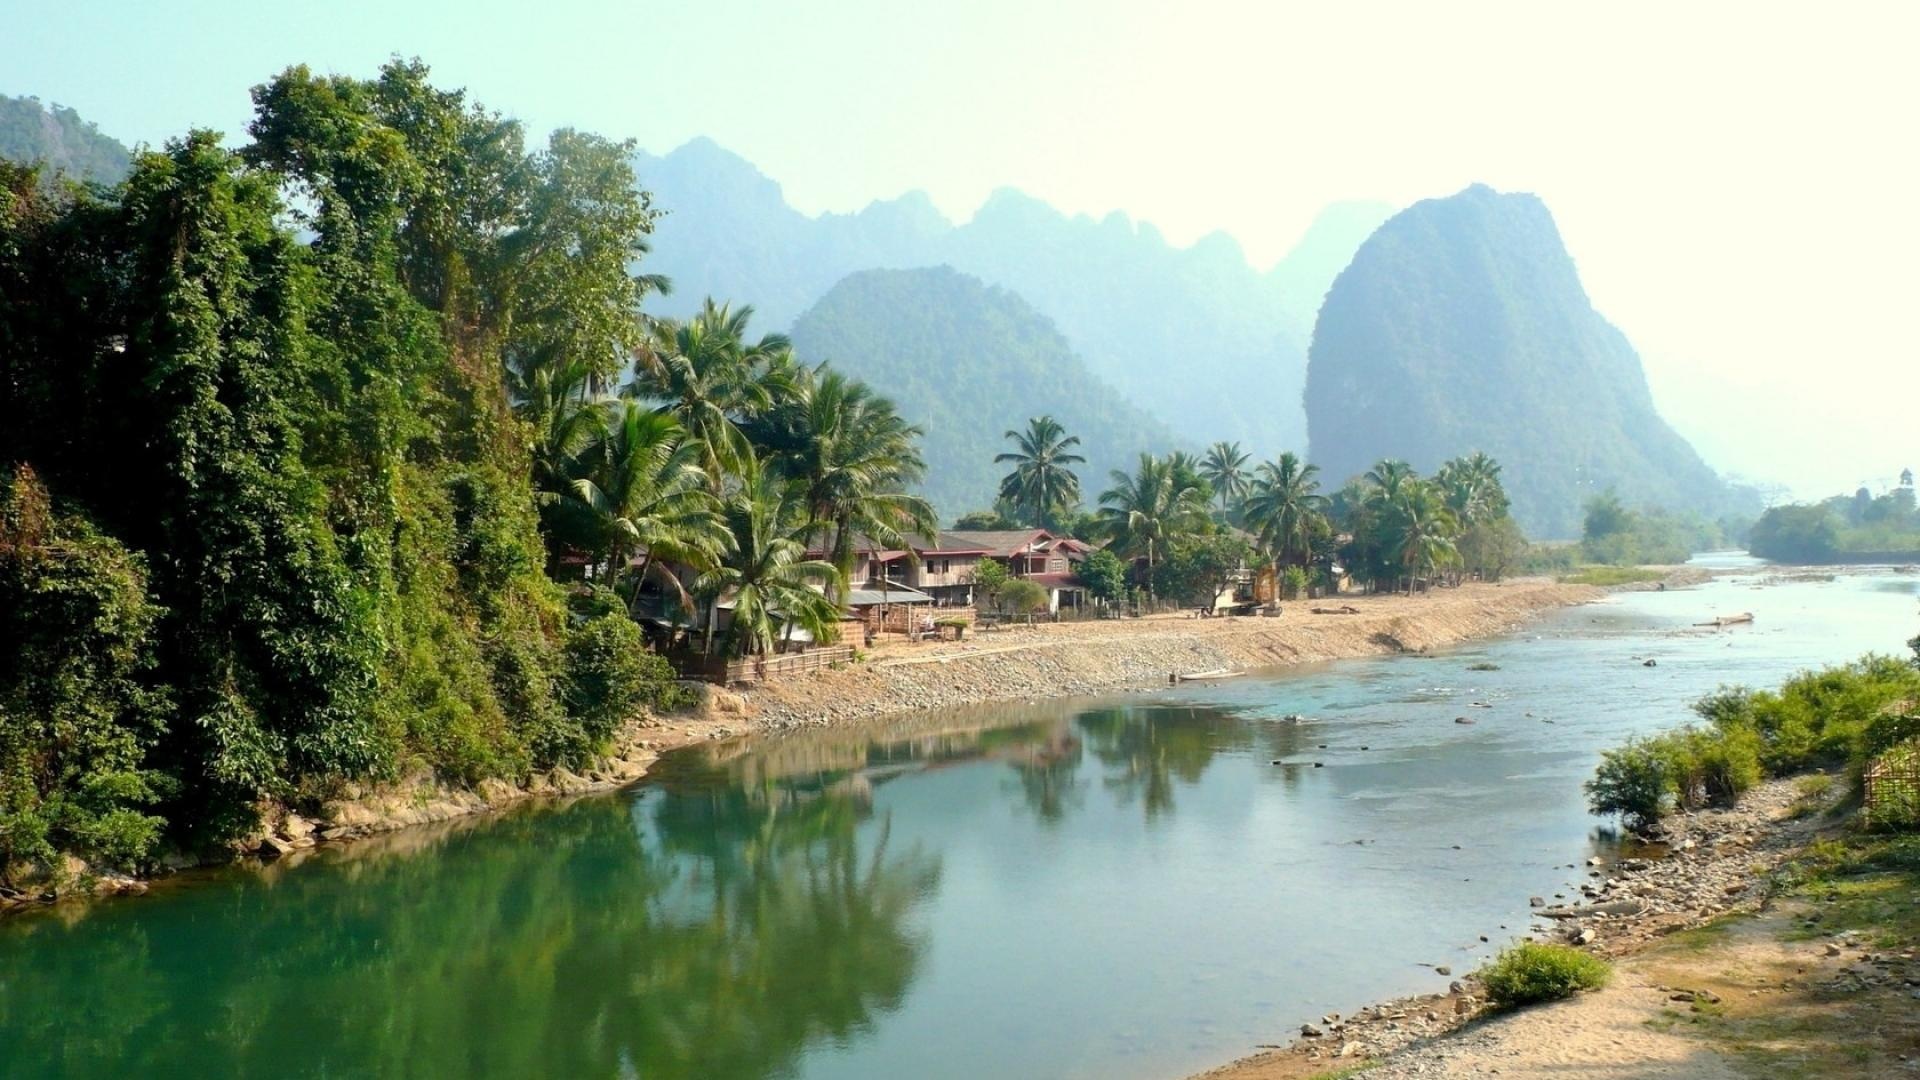 Laos wallpapers, Free backgrounds, Southeast Asian landscapes, Stunning views, 1920x1080 Full HD Desktop